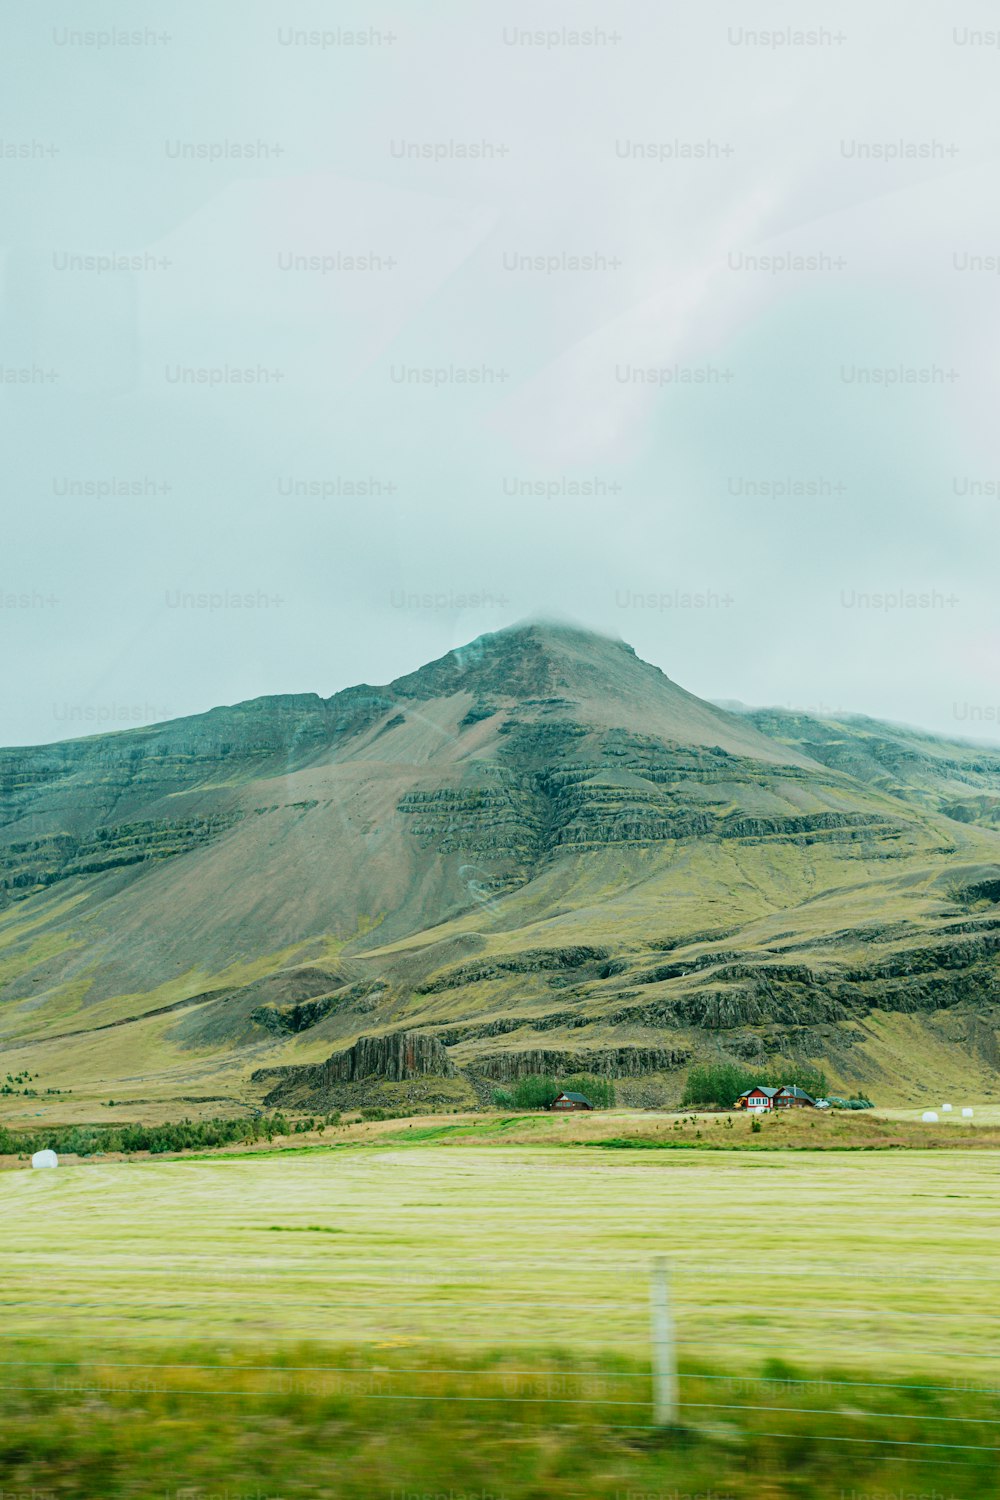 a large mountain with a grassy field below it